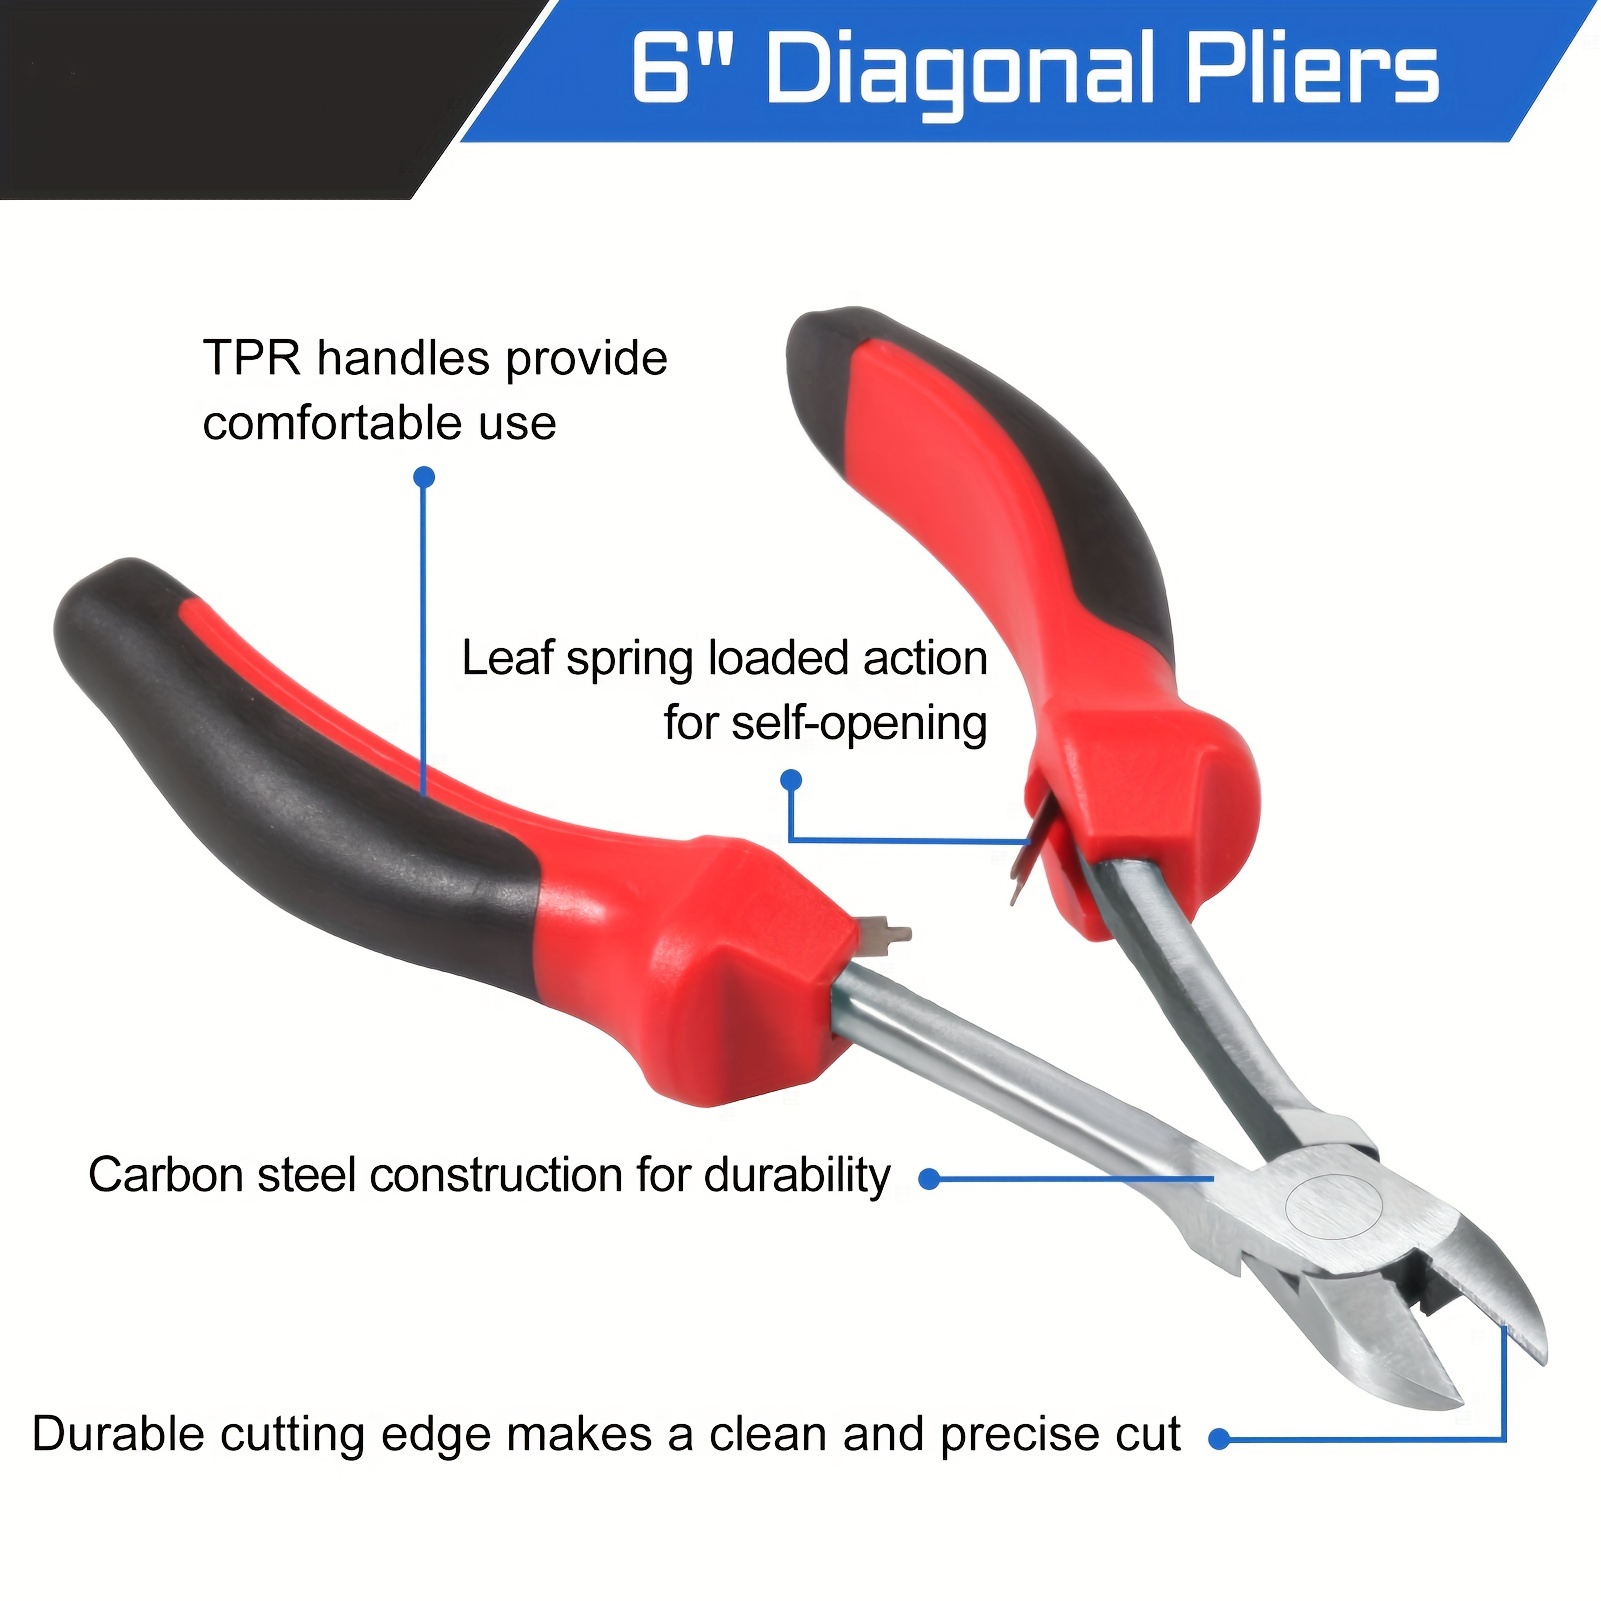 Jewelry Making Pliers Round Nose Professional Repair Stainless